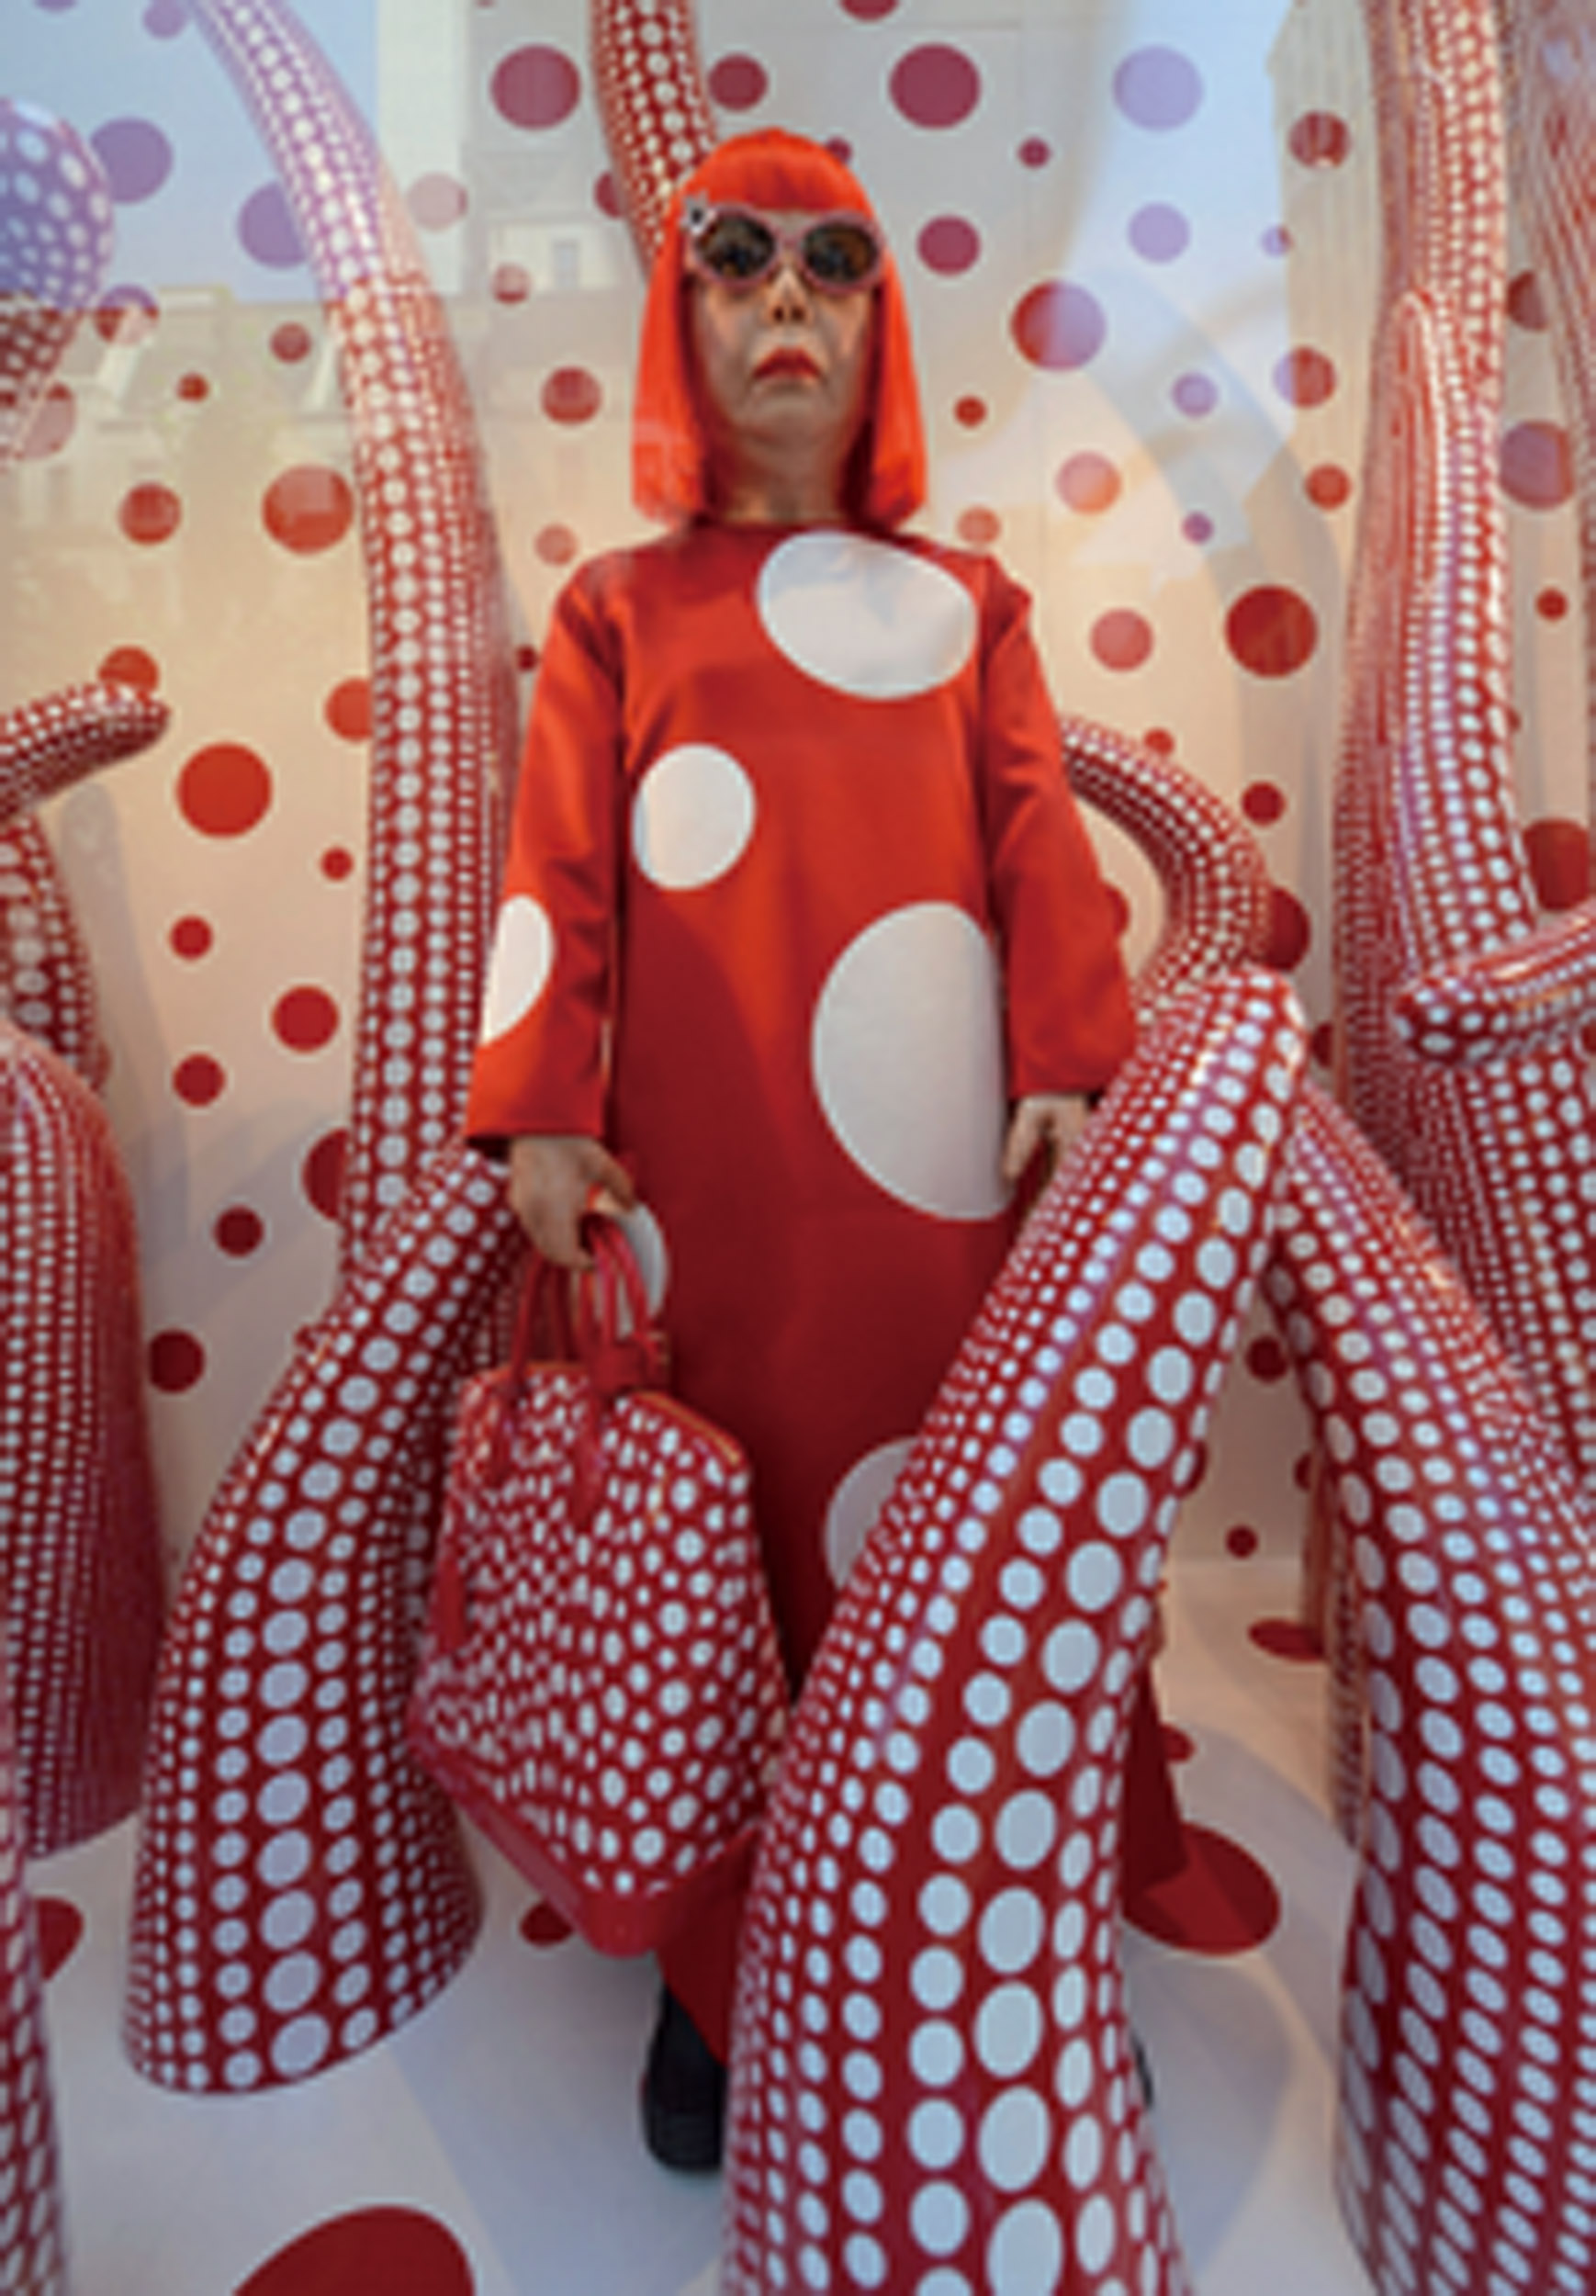 NEW YORK, NY - JULY 10: A wax figure of artist Yayoi Kusama on display during the Louis Vuitton And Yayoi Kusama Collaboration Unveiling at Louis Vuitton Maison on July 10, 2012 in New York City. (Photo by Dimitrios Kambouris/WireImage)